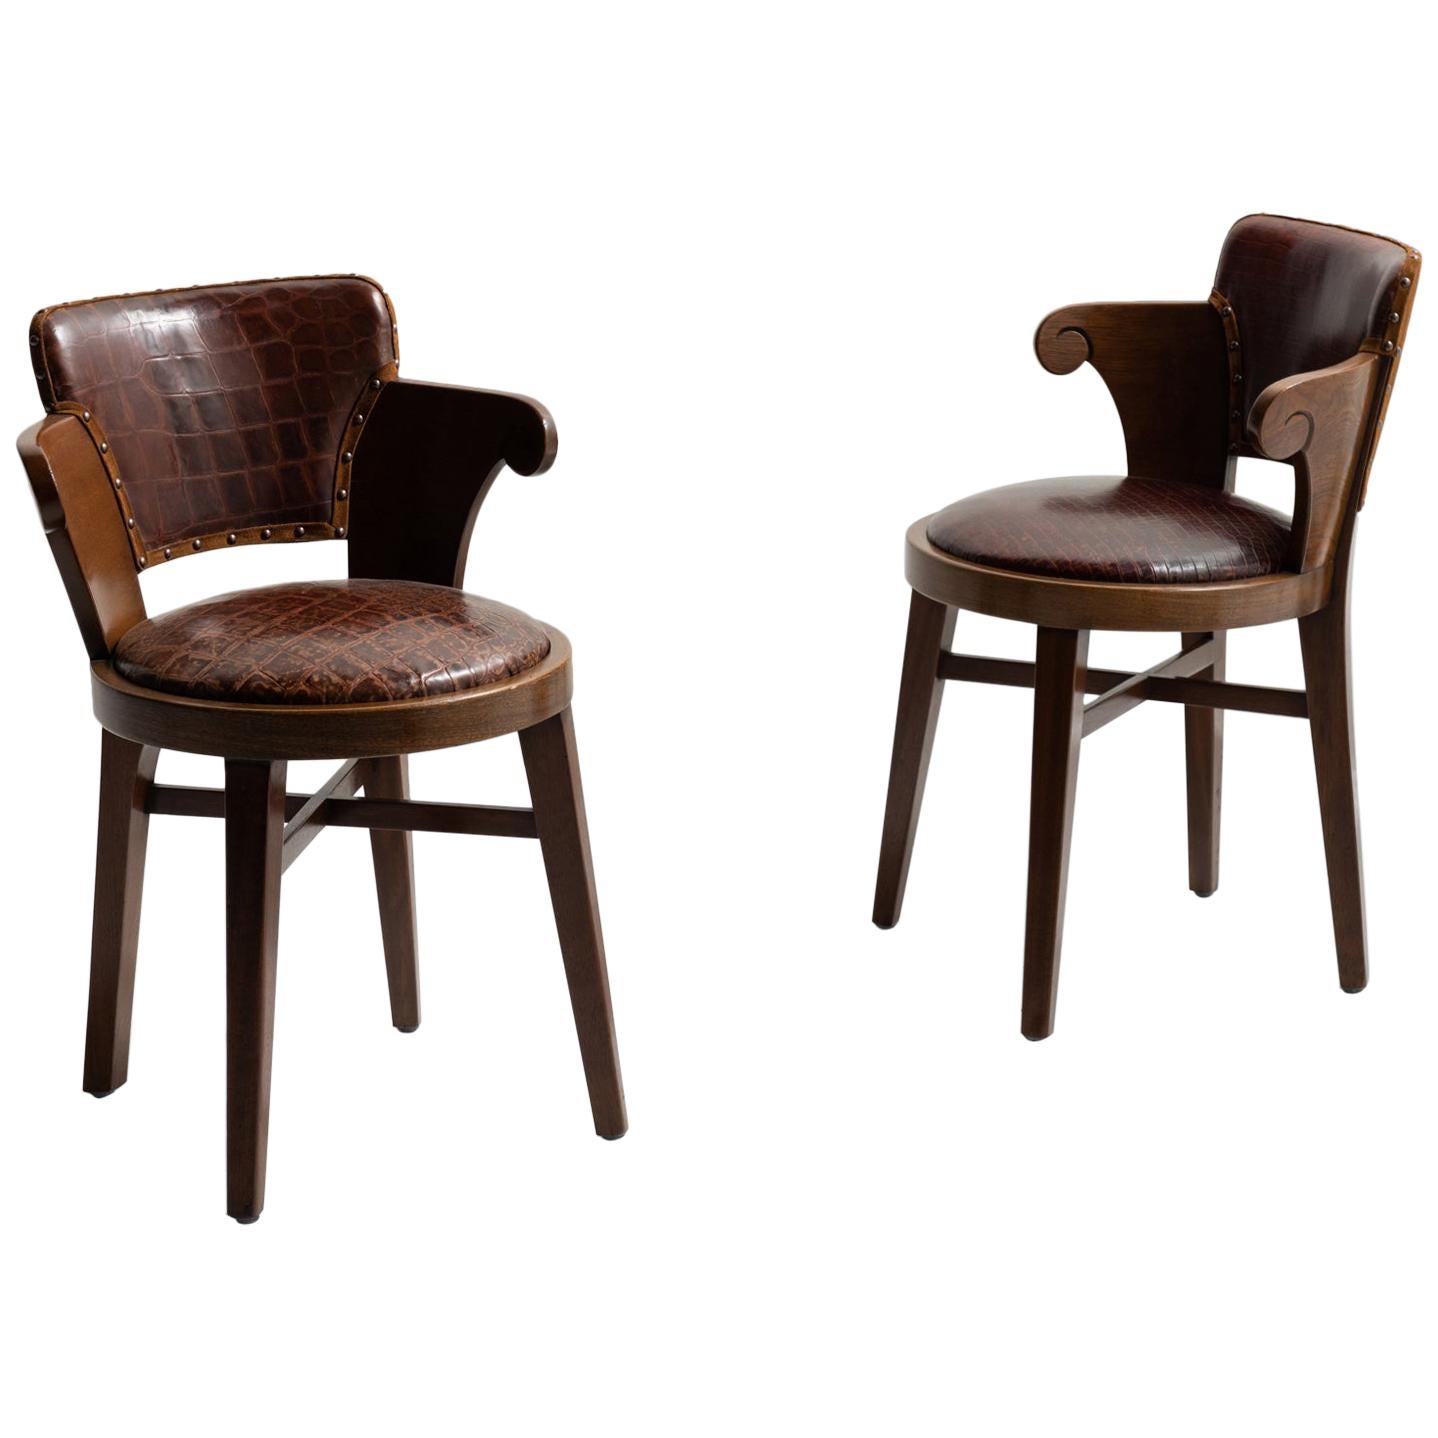 Pair of Edwardian Tavern Chairs